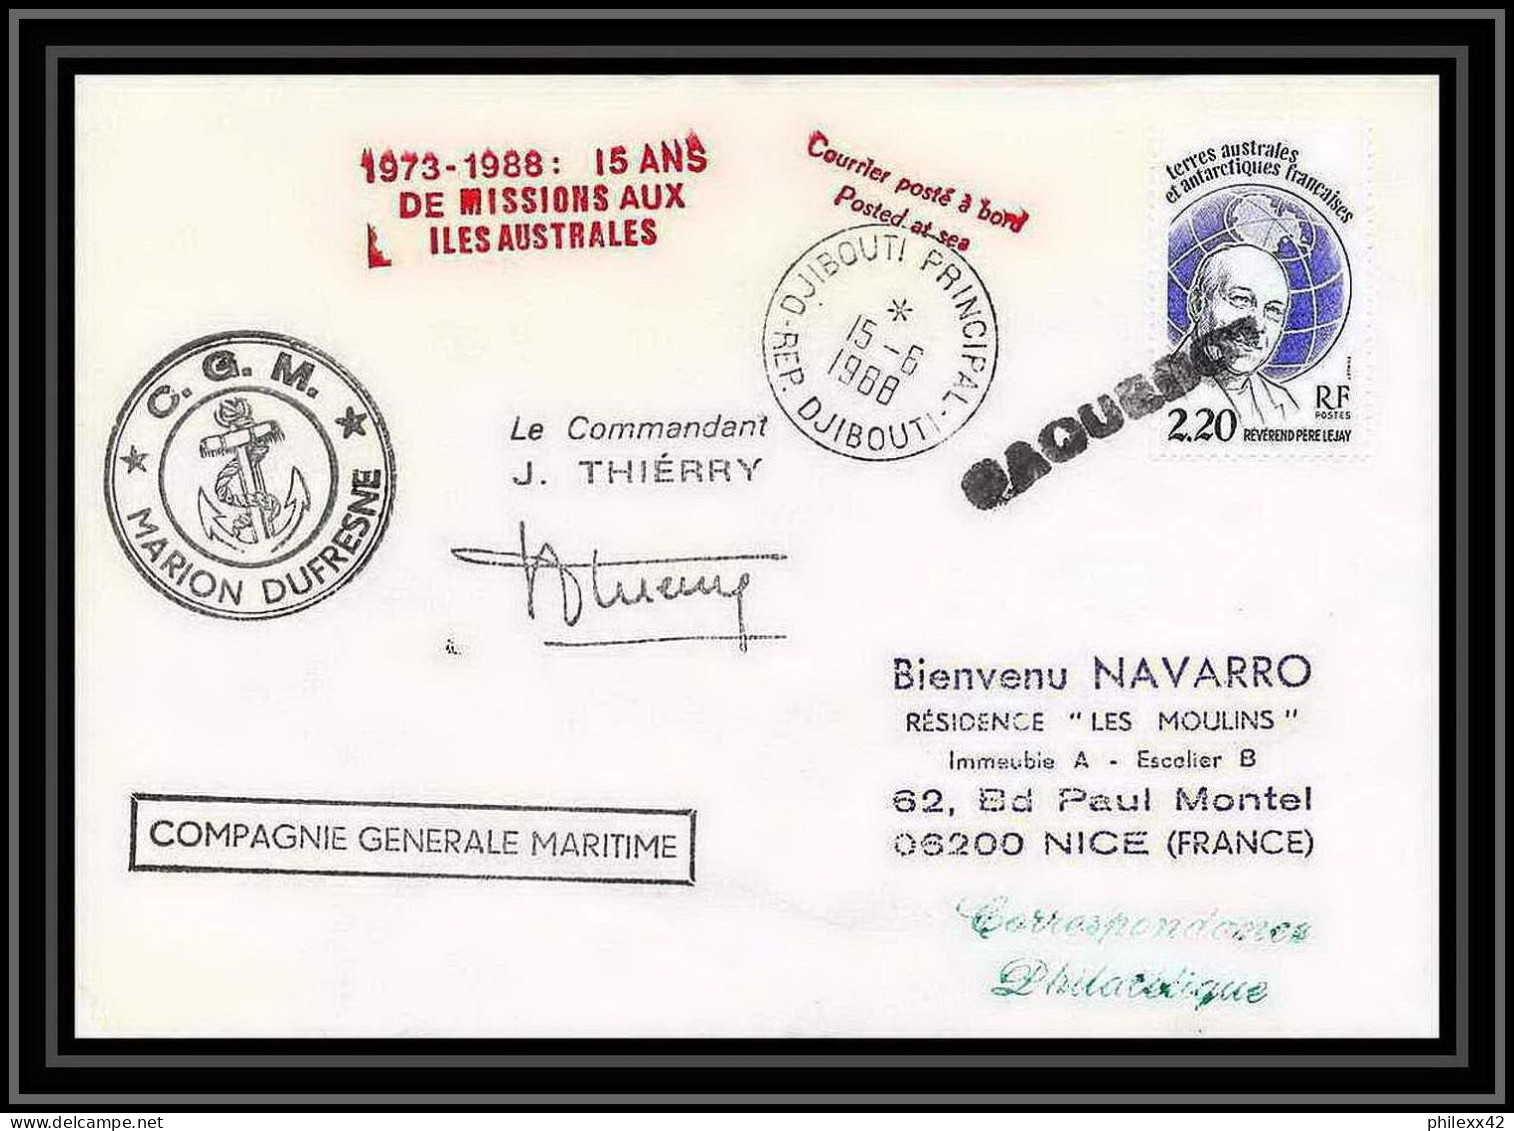 1564 15 Ans De Missions Signé Signed Thierry 16/6/1988 Marion Dufresne TAAF Antarctic Terres Australes Lettre (cover) - Antarktis-Expeditionen